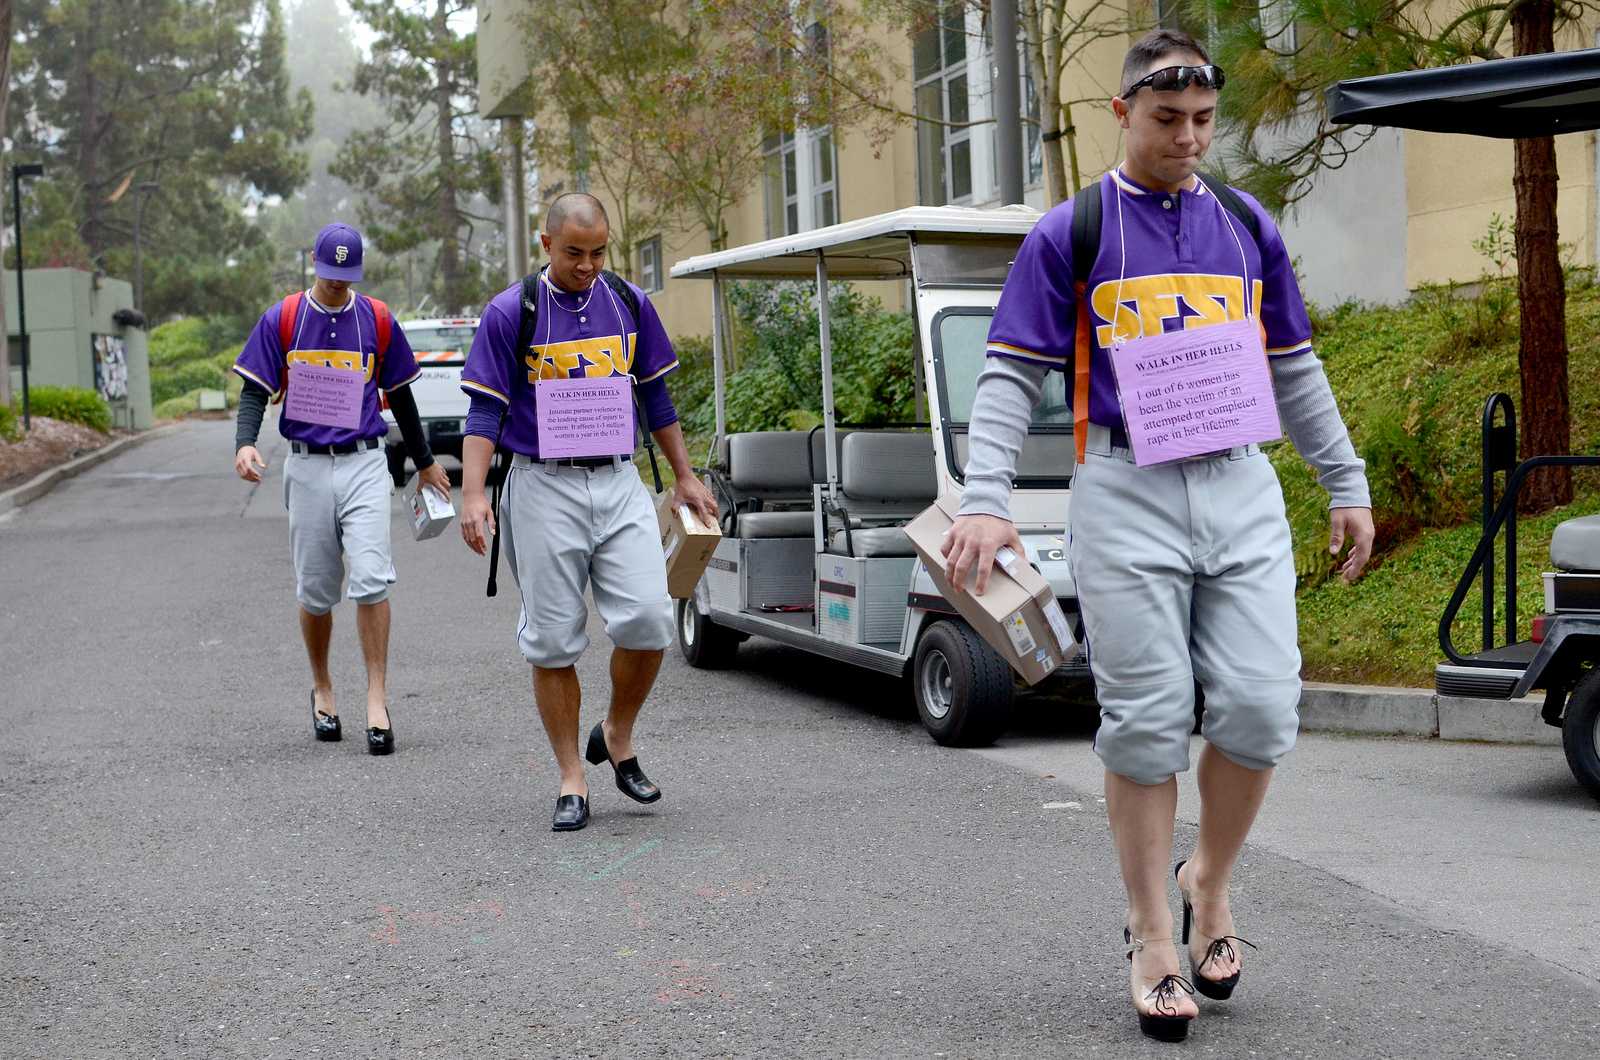 Jack Veronin (left), Peter Reyes (middle) and Carter Loud (right), members of the SF State baseball team, walk in heels for The SAFE Place and Men Can Stop Violence event titled: Walk in Her Heels. This event is a men’s walk to stop rape, sexual assault, and gender violence. Men volunteers sign up, pick up heels and go about their normal days wearing these shoes and collecting donations with a shoe box until noon where the men come together in Malcolm X Plaza at SF State on Tuesday, October 22 to share their experience, if they so choose. Photo by Virginia Tieman / Xpress